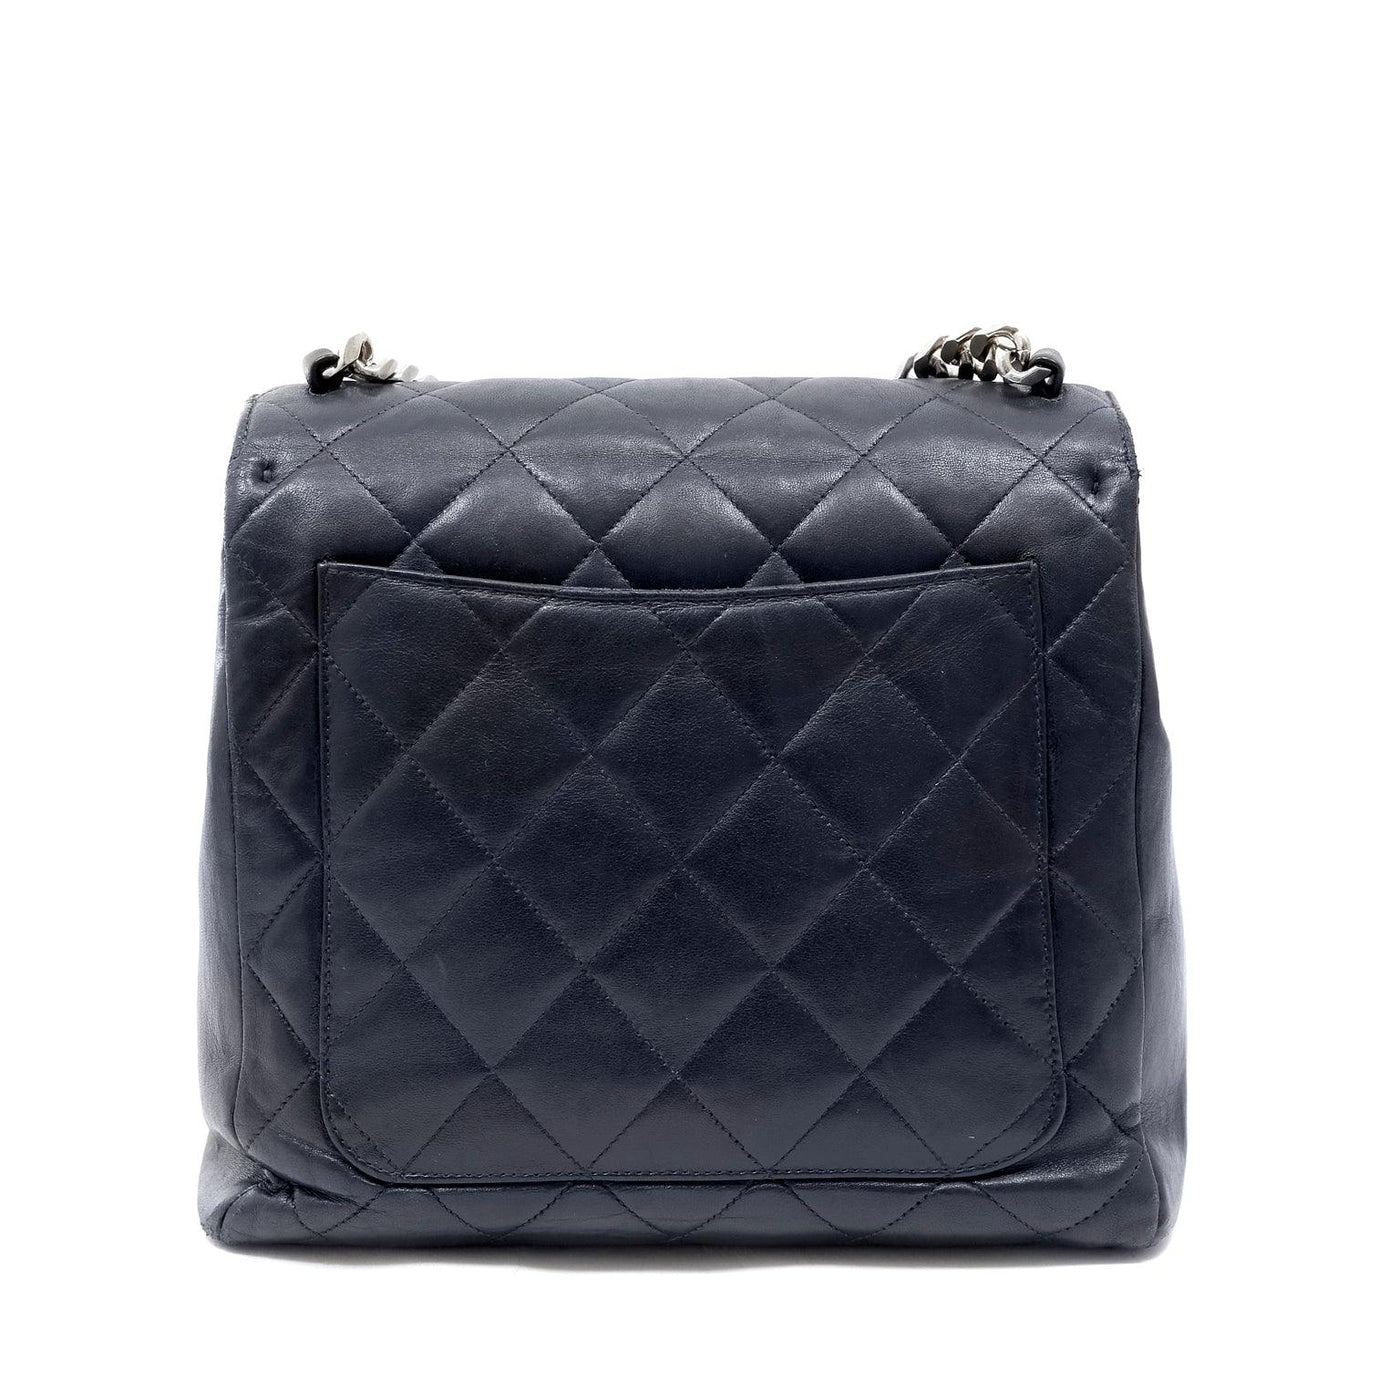 Chanel Navy Blue Top Handle Flap Quilted Bag w/ Silver Bracelet Handle - Only Authentics